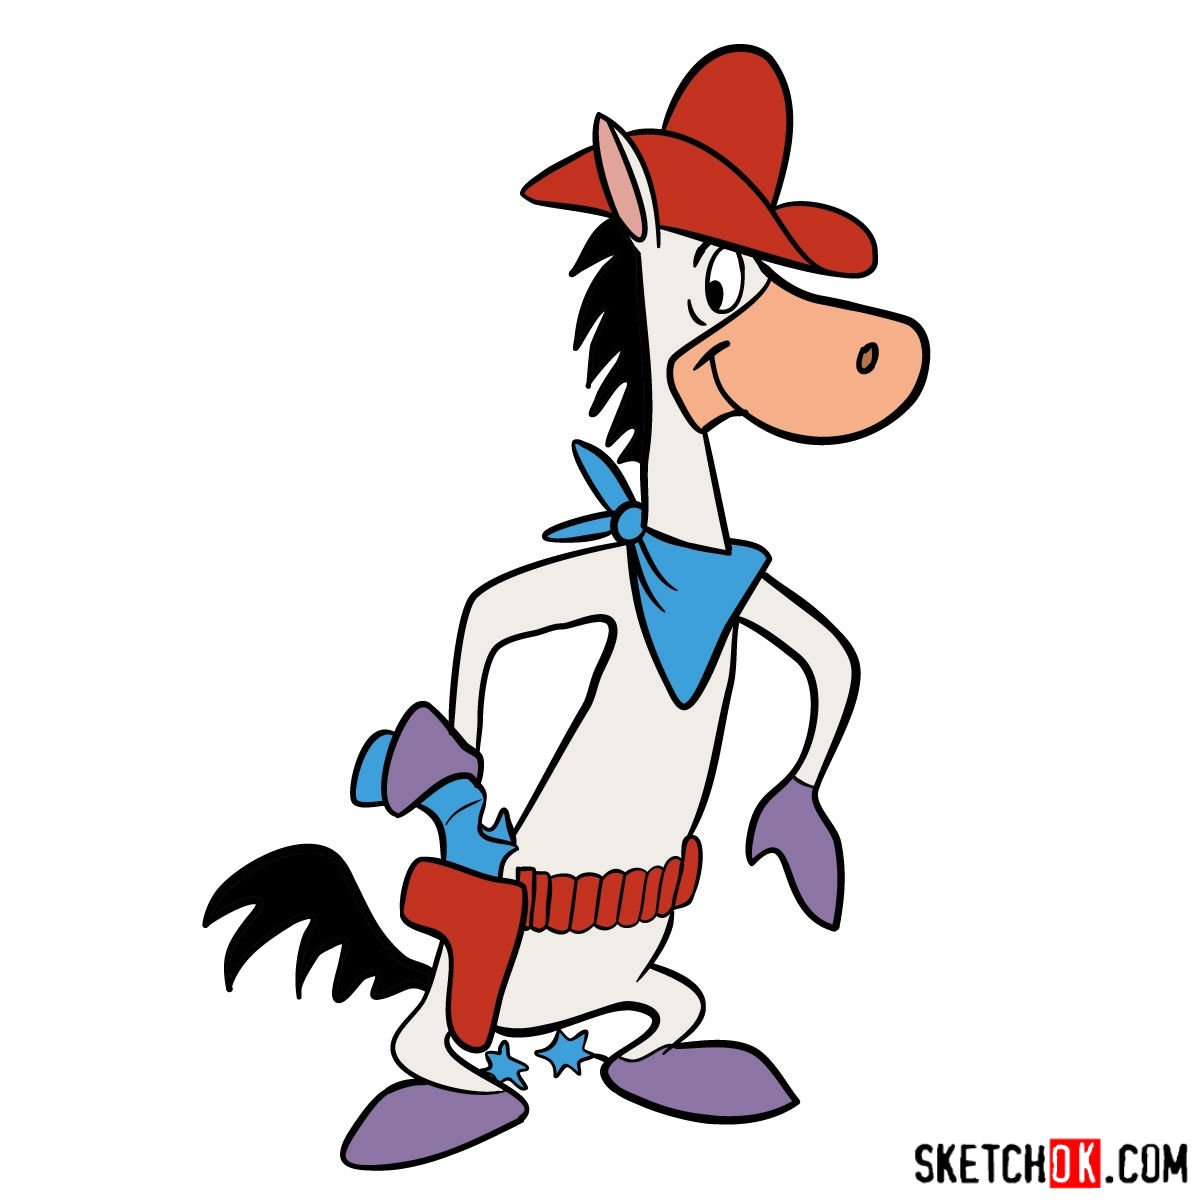 How to draw Quick Draw McGraw